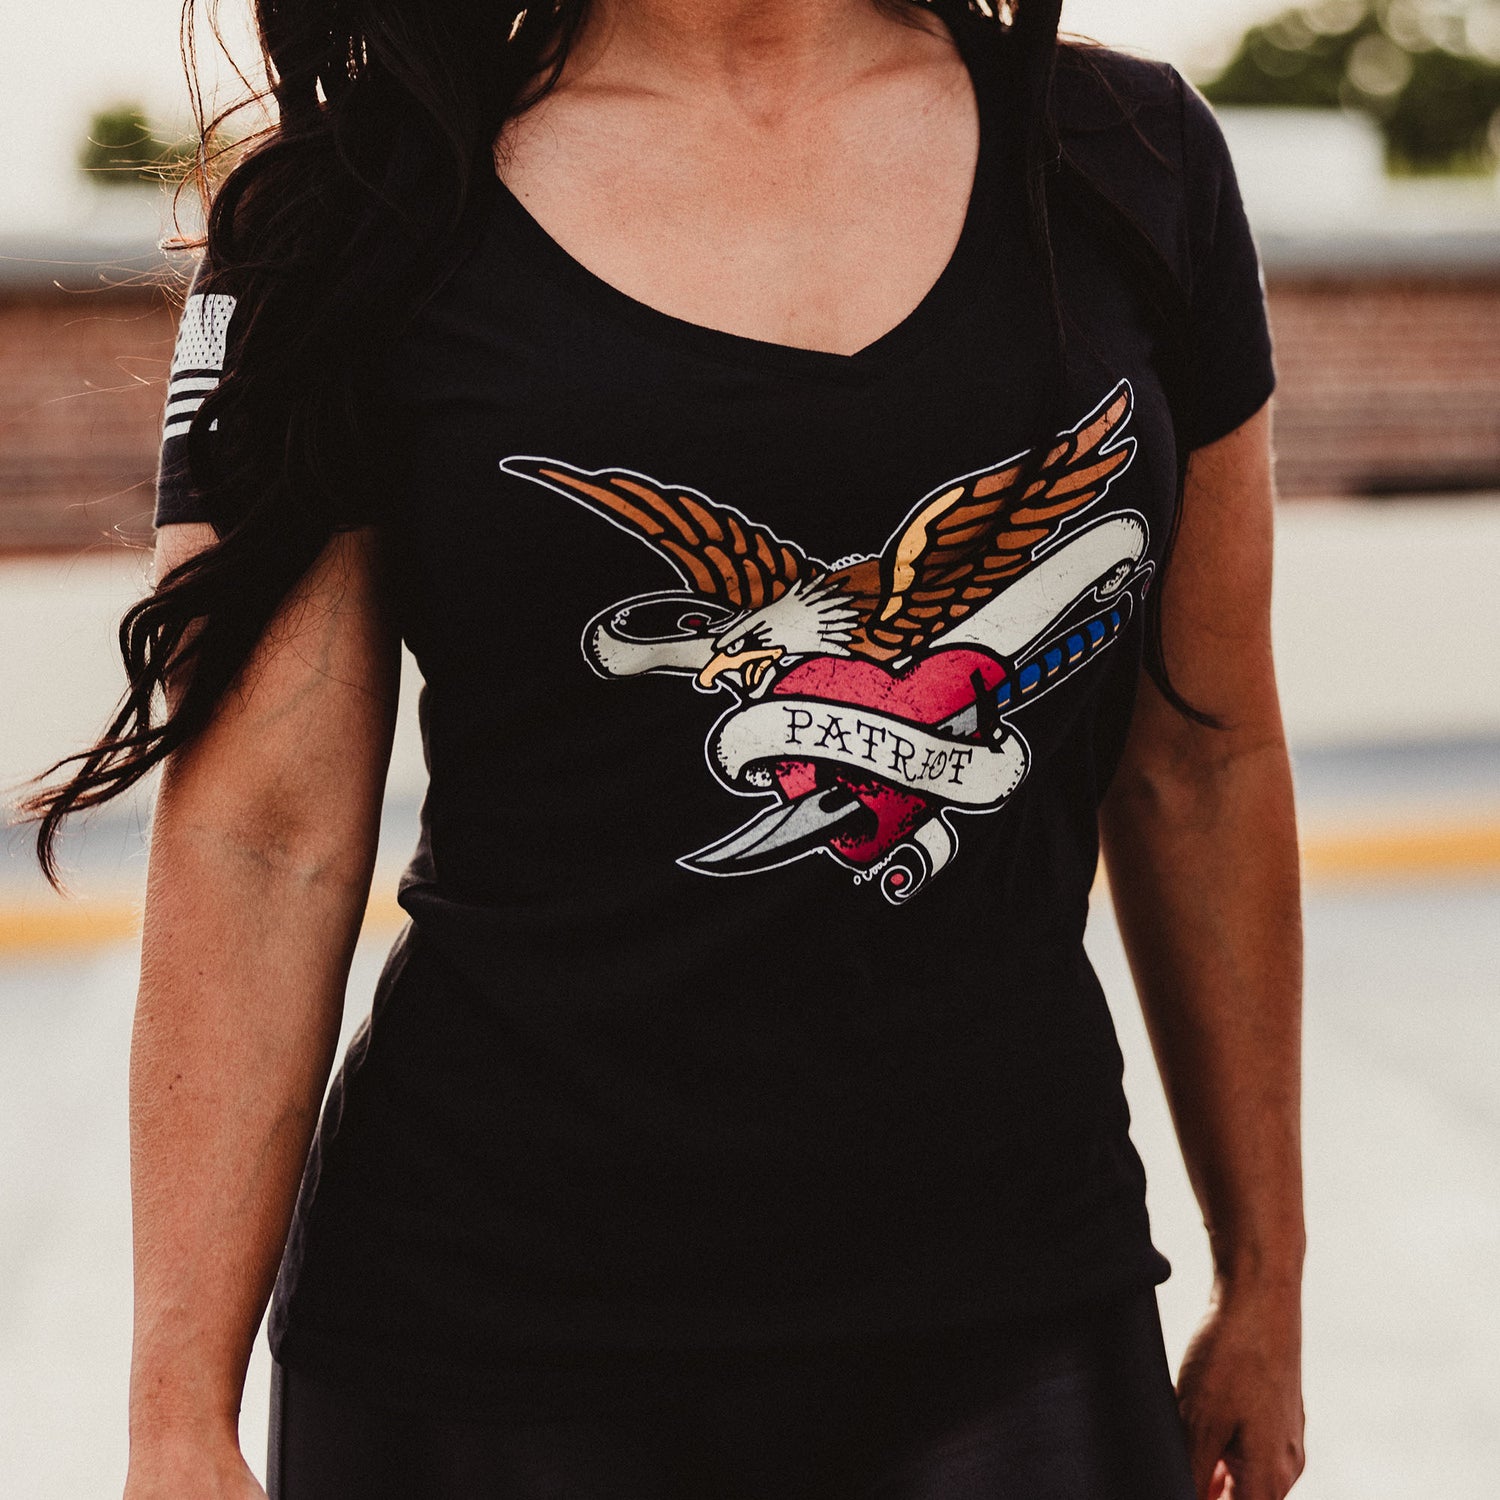 Patriotic Tops for Women - Tattoo Inspired T-Shirt 